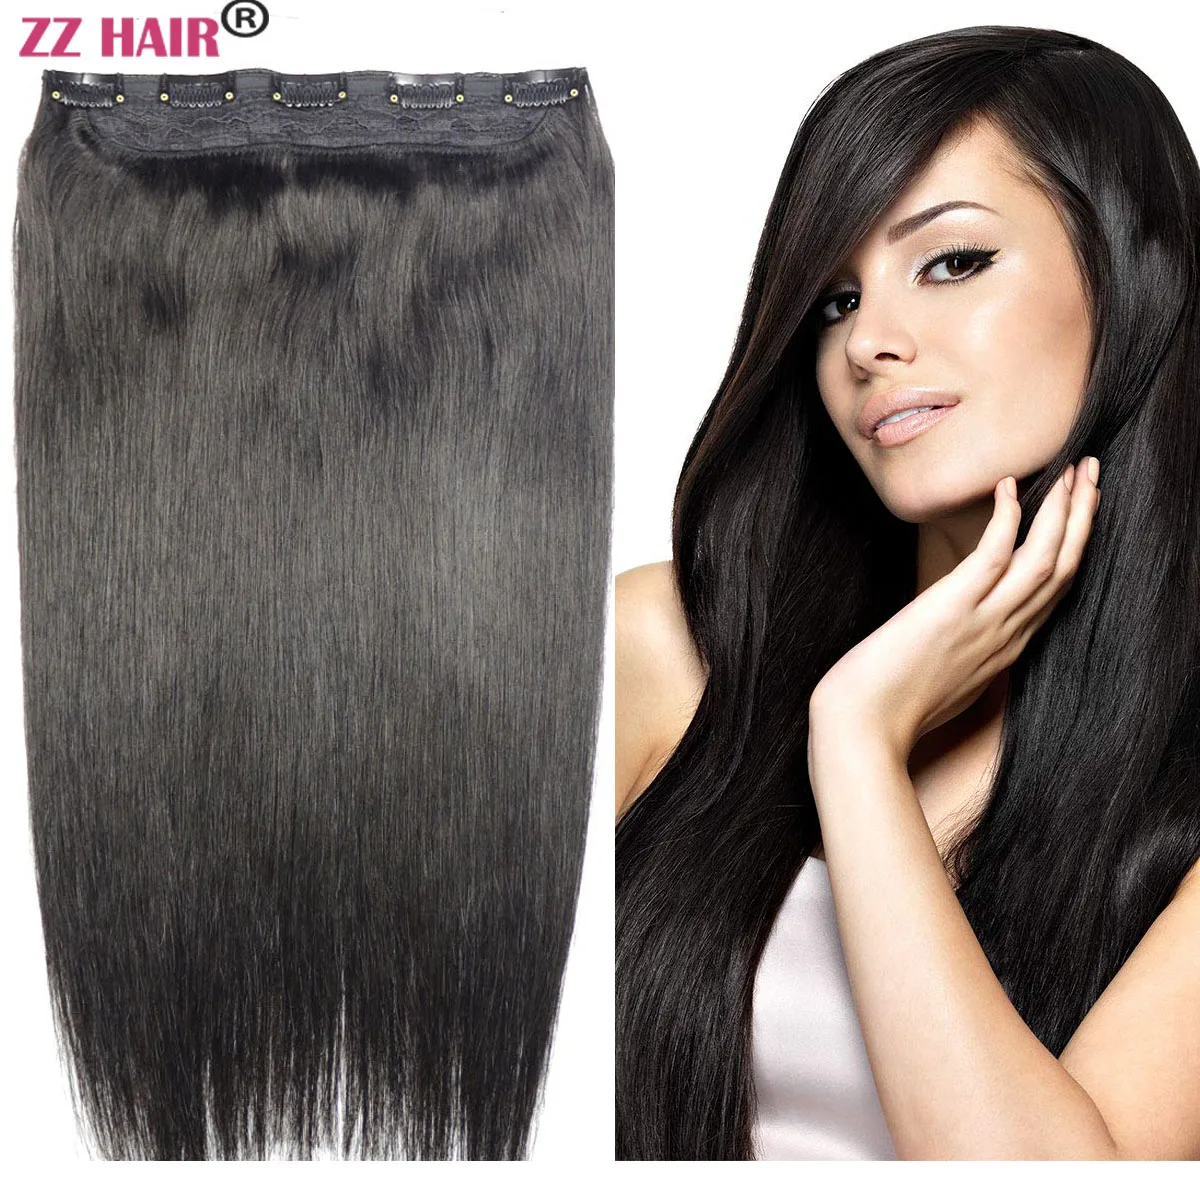 

ZZHAIR 100% Brazilain Human Remy Hair Extensions 16"-24" 1pcs Set 200g 5 Clips in One Piece Natural Straight